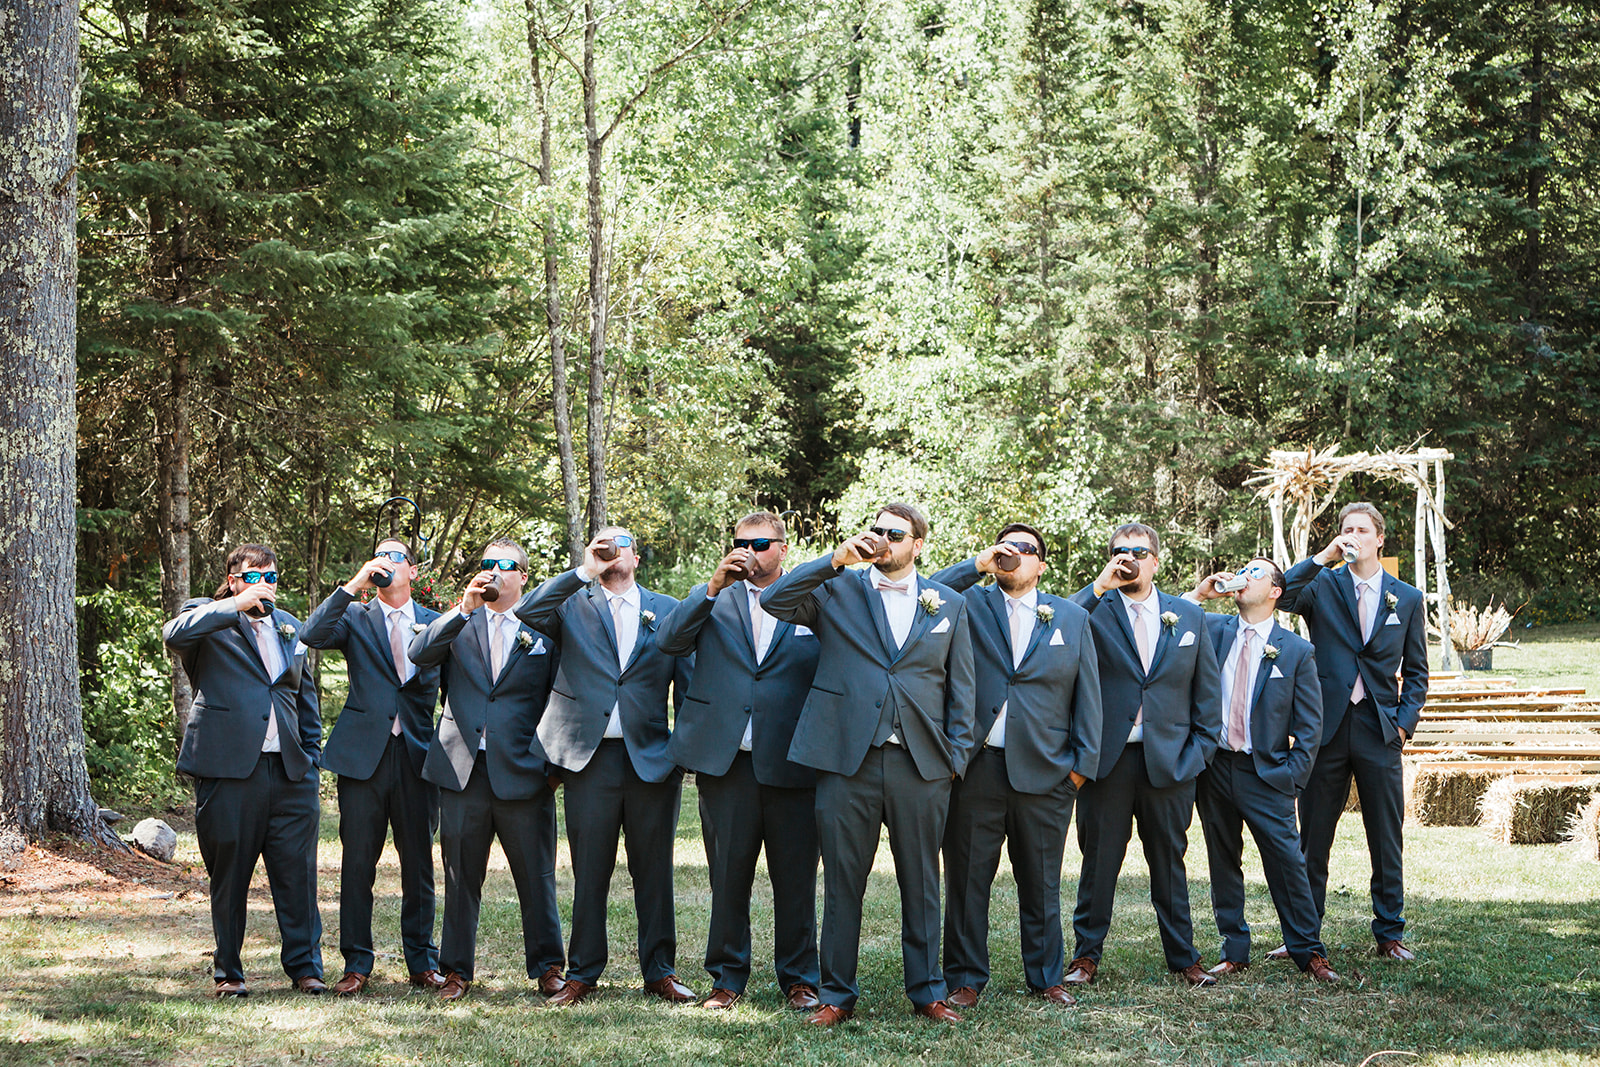 Groom and groomsmen photos from a summer wedding in Minnesota